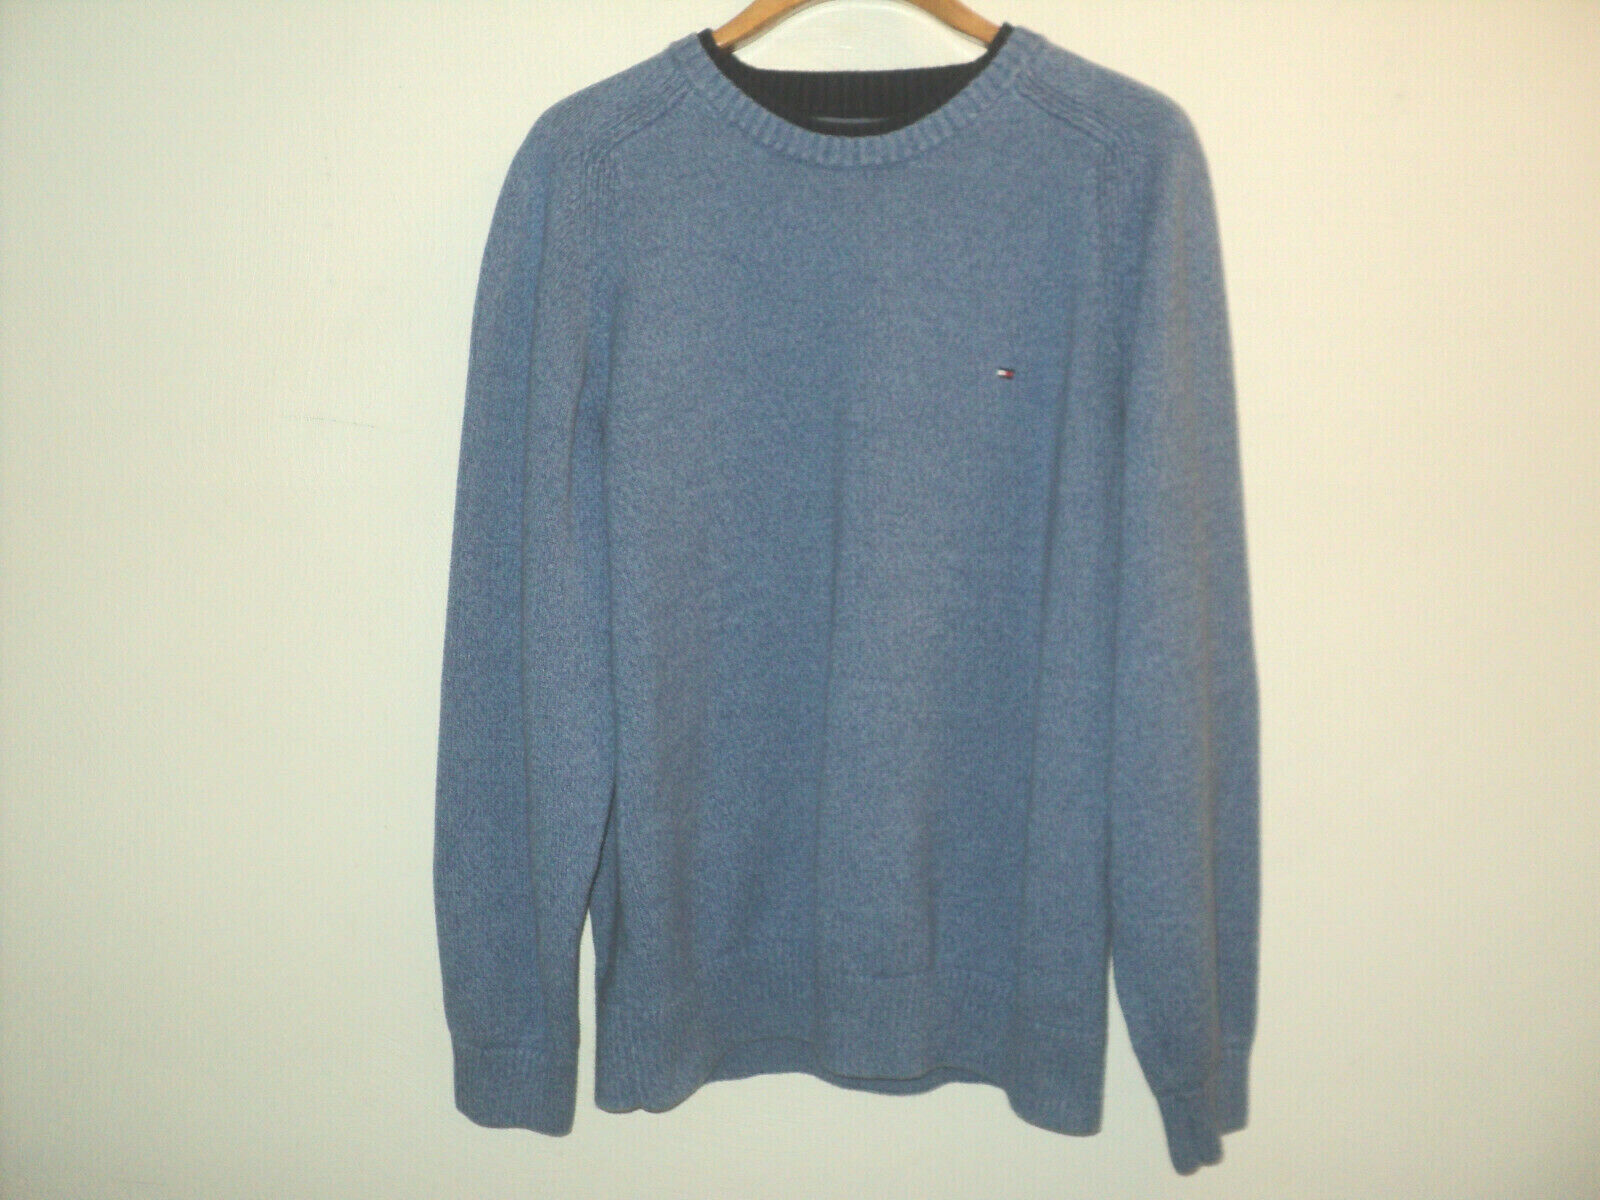 Primary image for Tommy Hilfiger Sweater Pullover Crew Neck Men's XXL Blue Long Sleeves Cotton